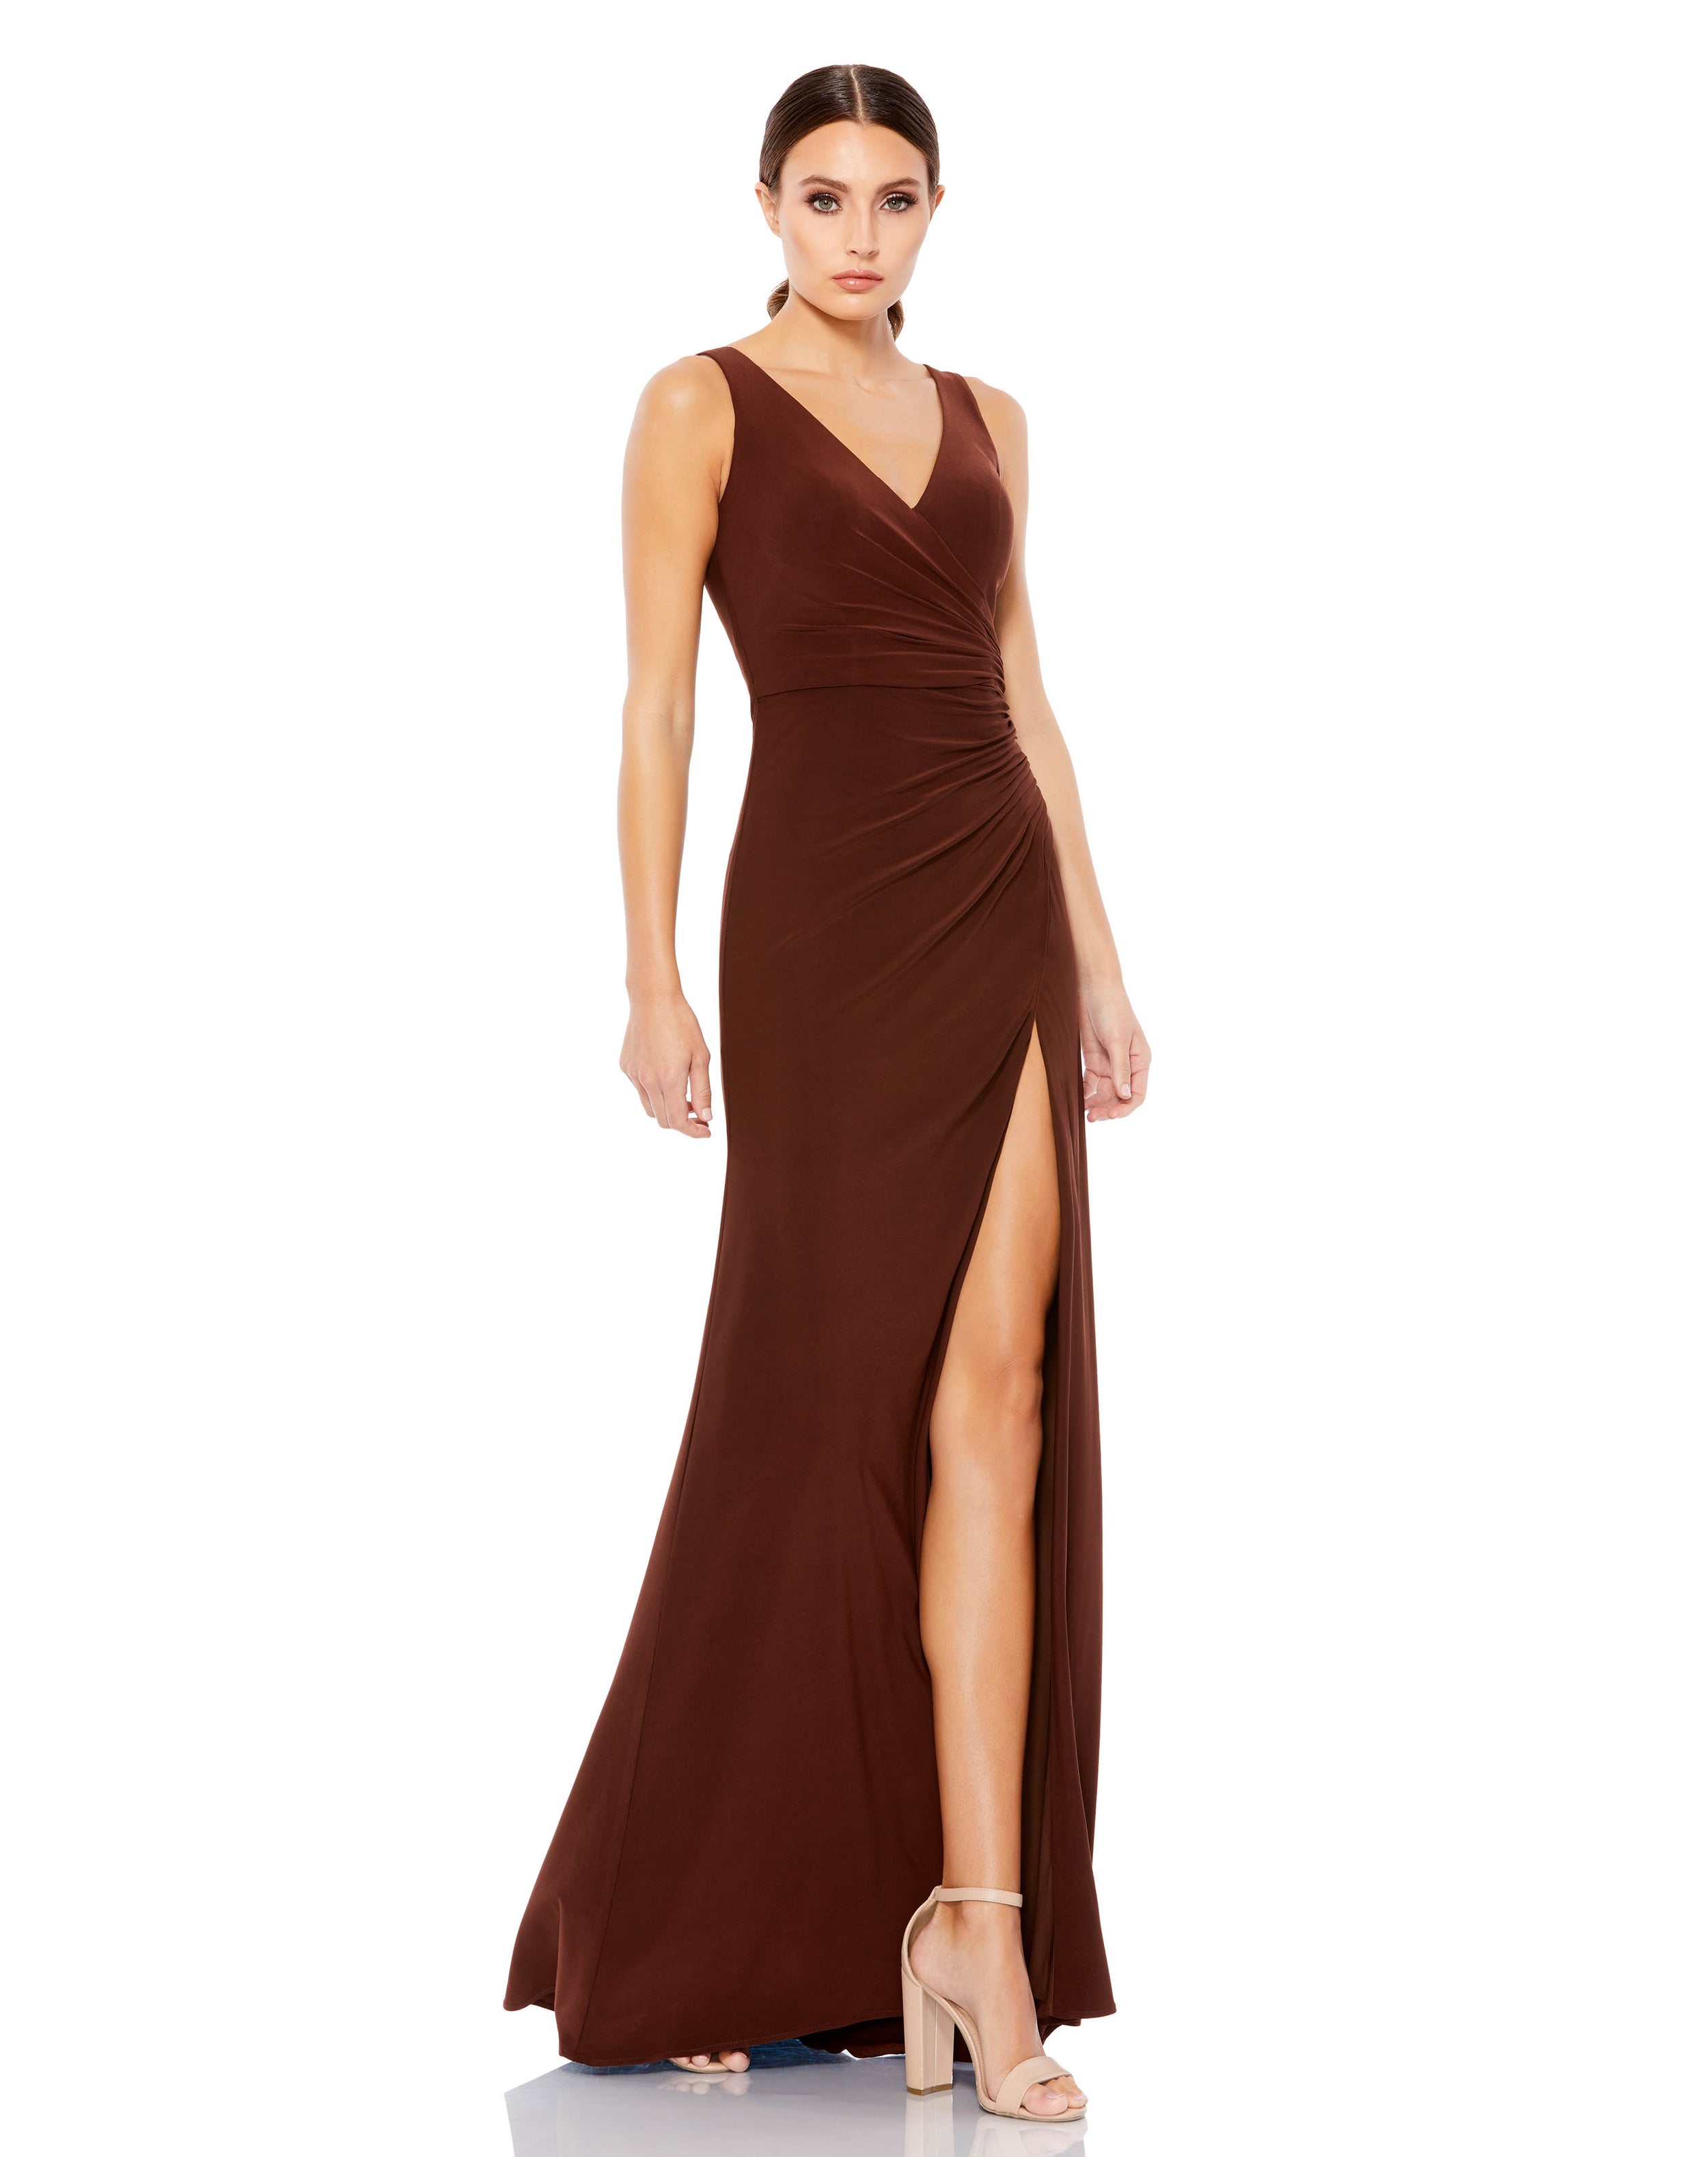 The model is wearing a Mac Duggal 26513 Prom Long Sleeveless Formal Dress with a slit.